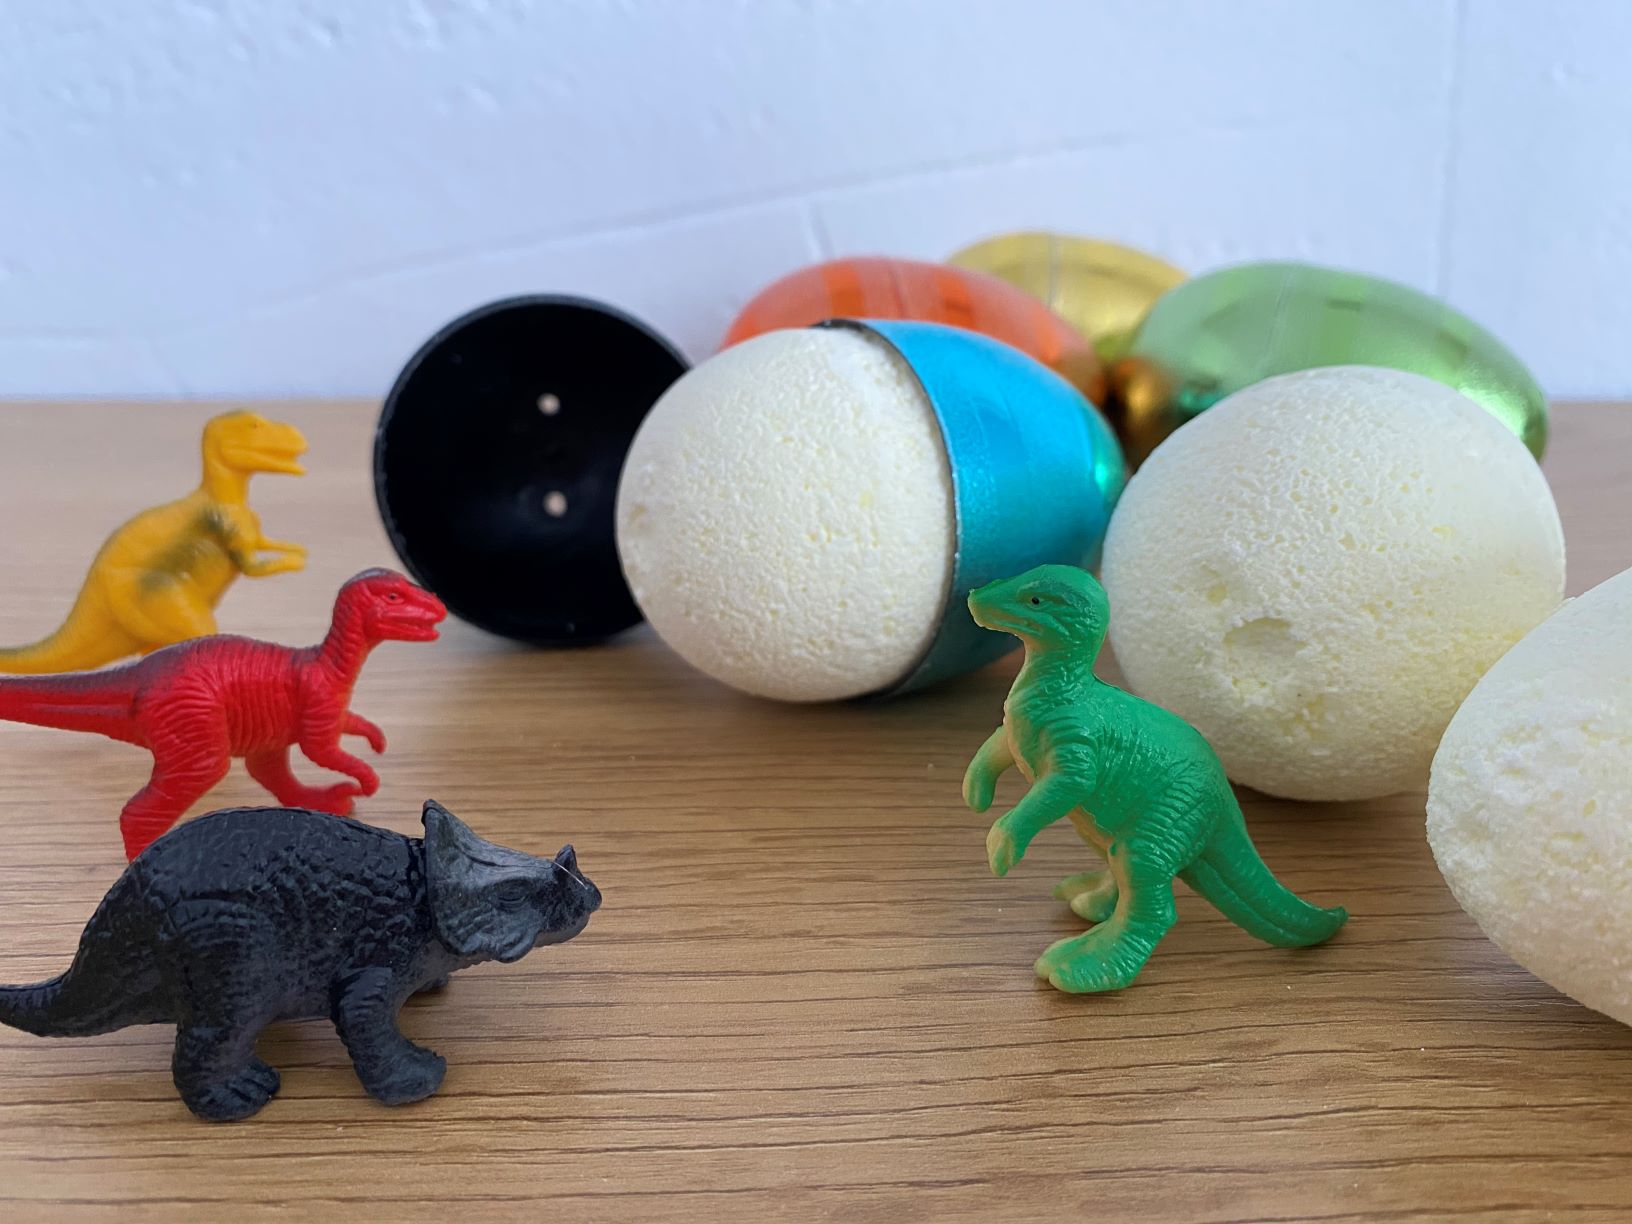 Easter DIY Bath Bomb with a Dino Surprise - Terra by Battat